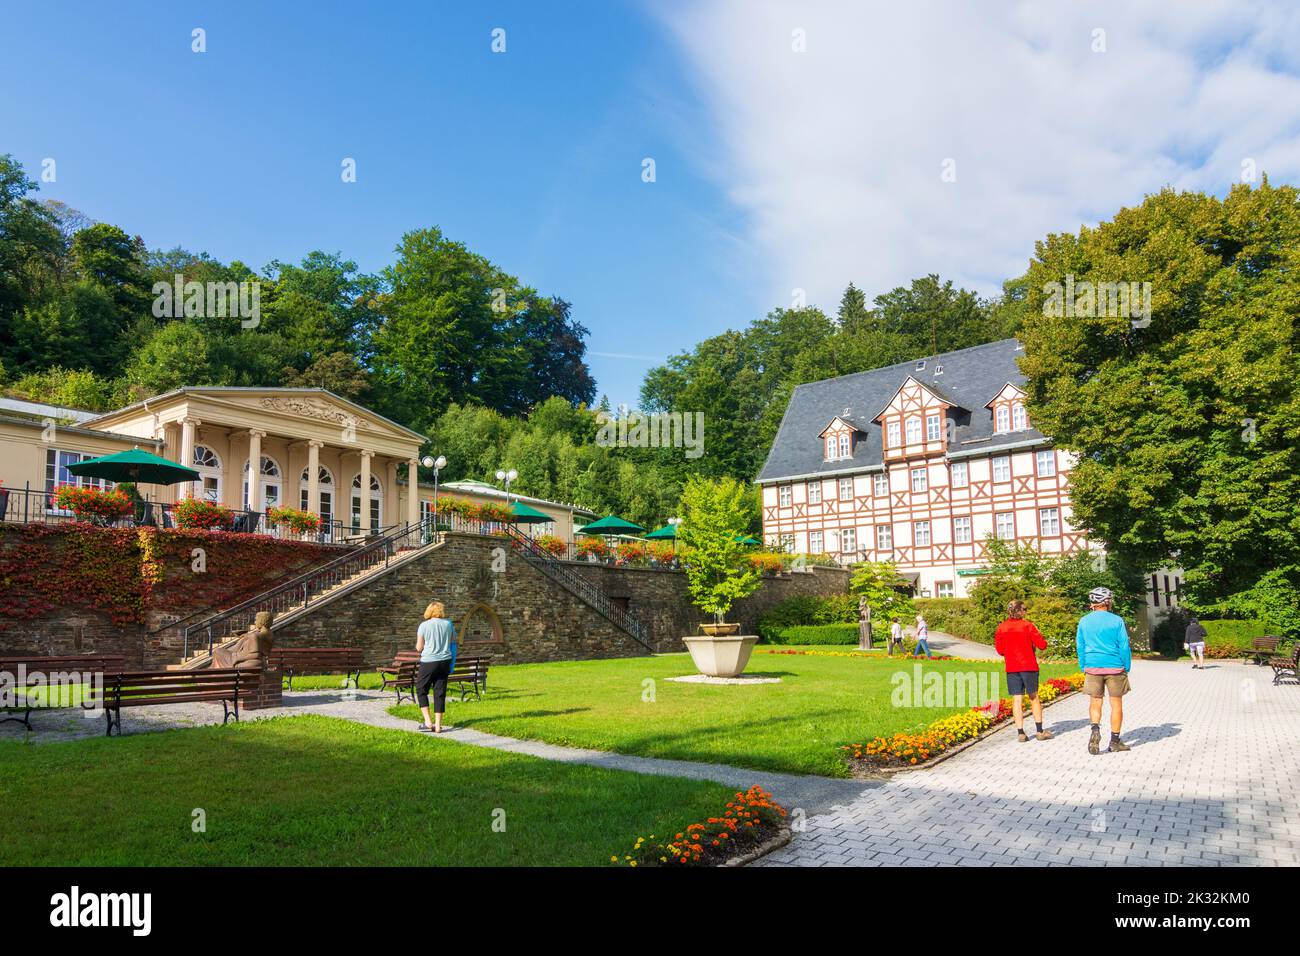 Thermalbad Wiesenbad: spa with Wandelhalle (foyer house), cafe, cyclists in Erzgebirge, Ore Mountains, Sachsen, Saxony, Germany Stock Photo